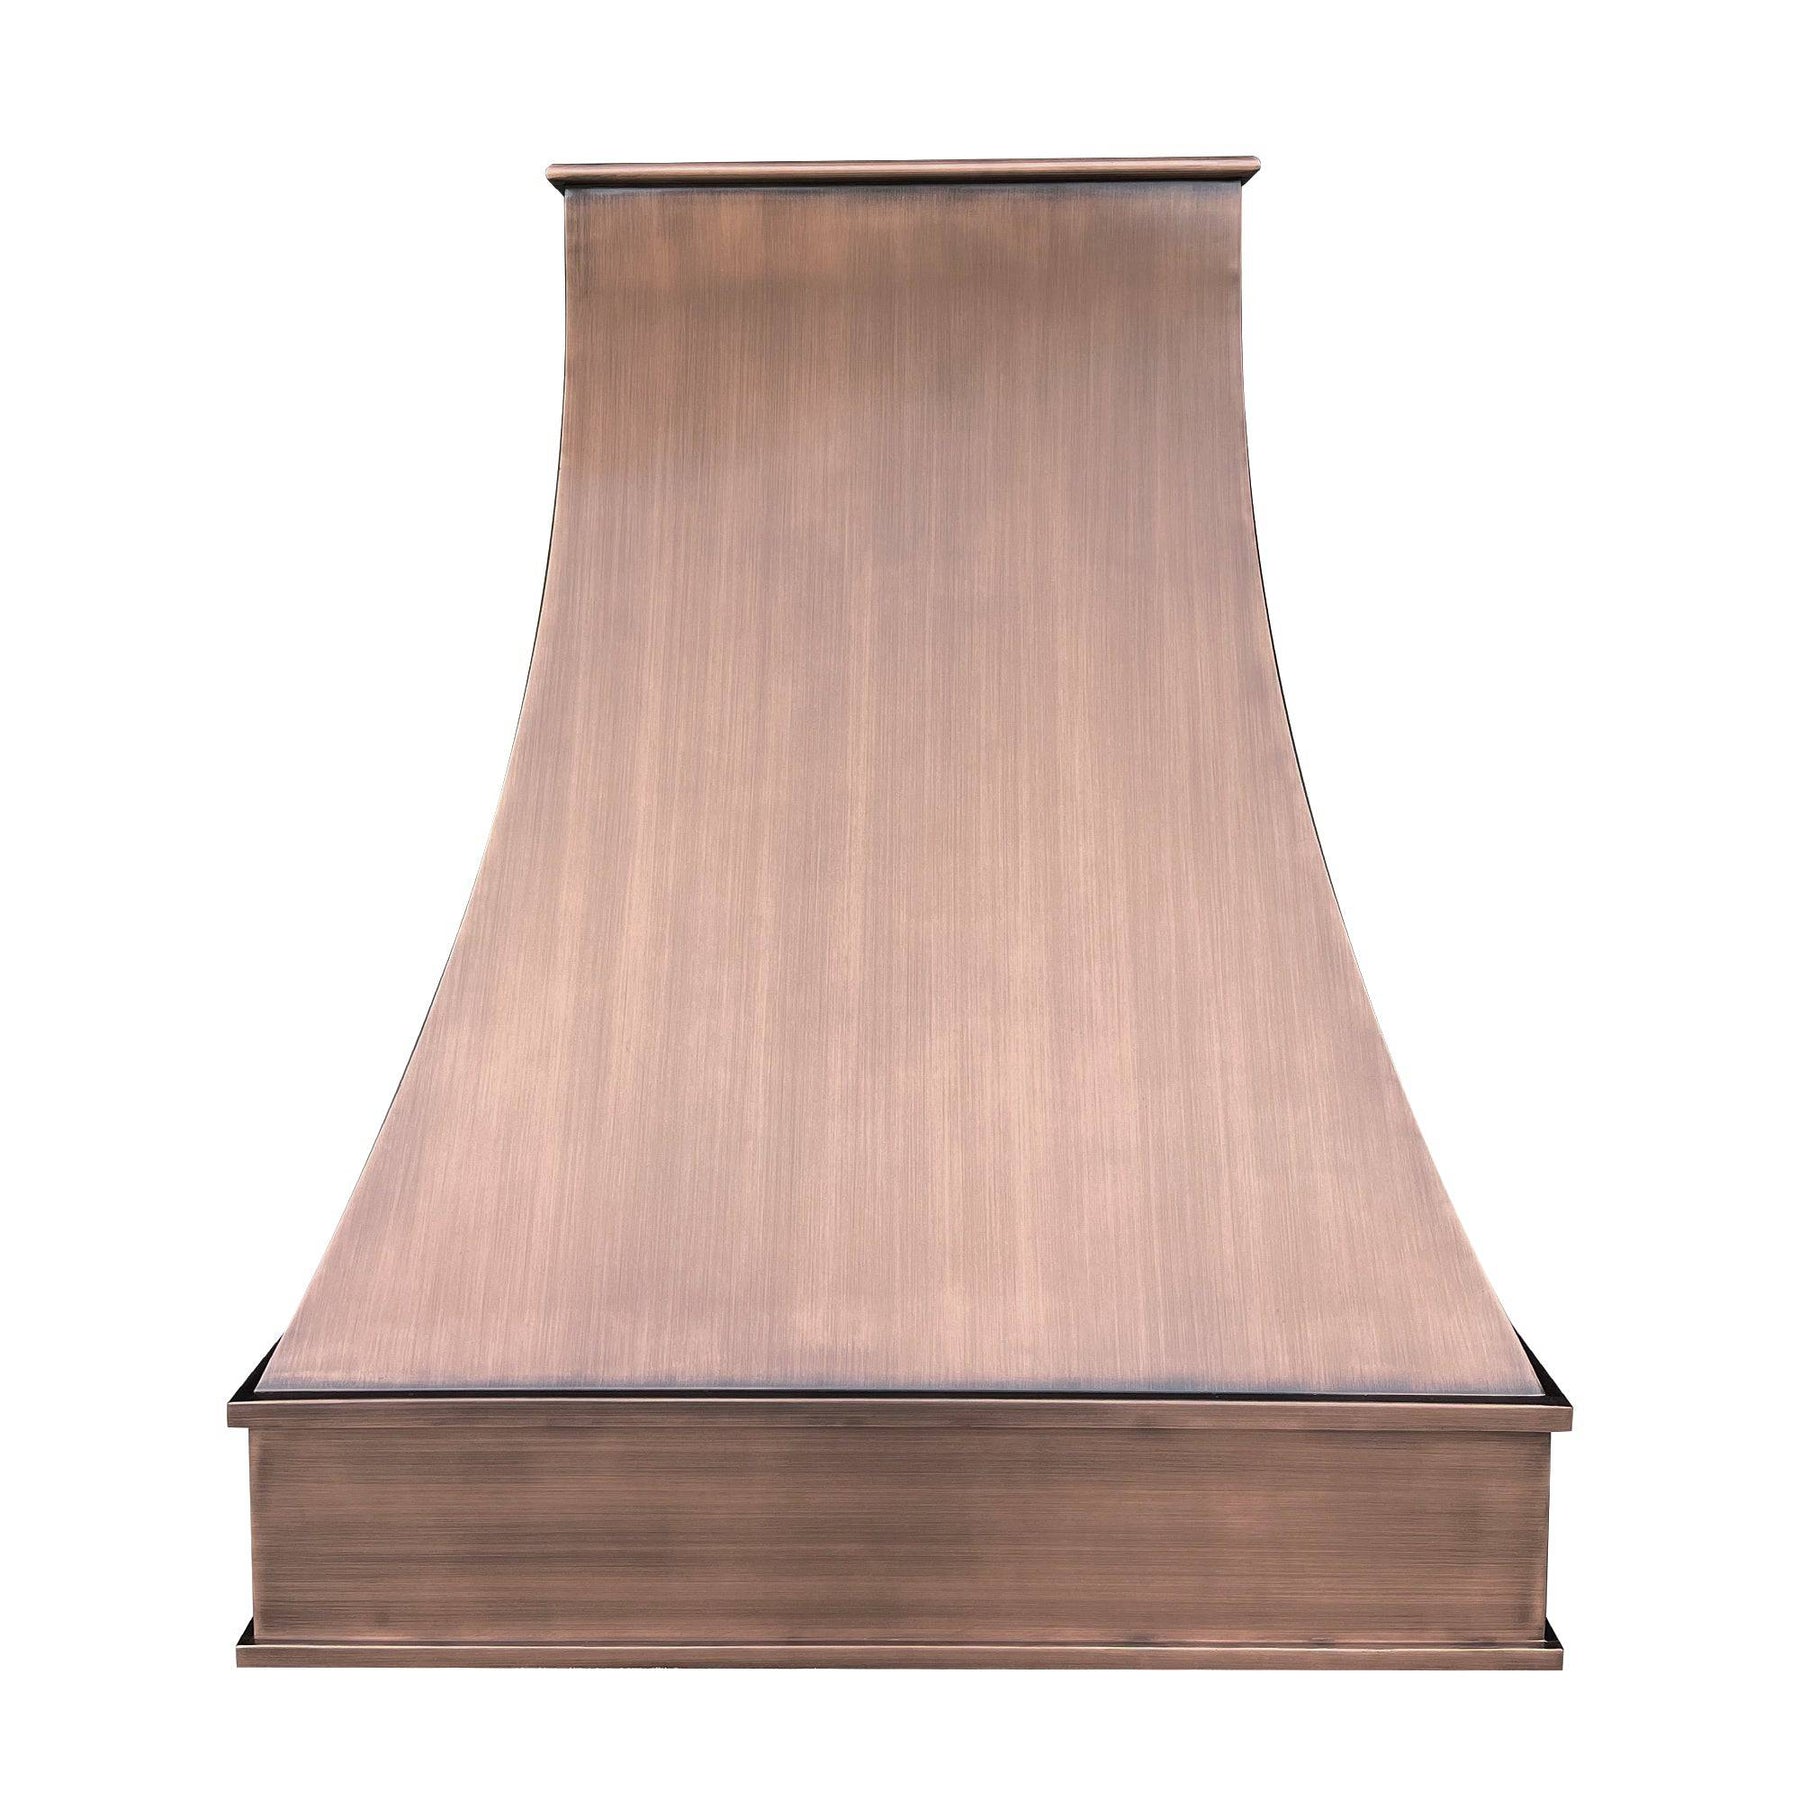 Fobest Farmhouse Custom Antique Copper Range Hood with Smooth Texture FCP-49 - Copper Range Hood-Fobest Appliance